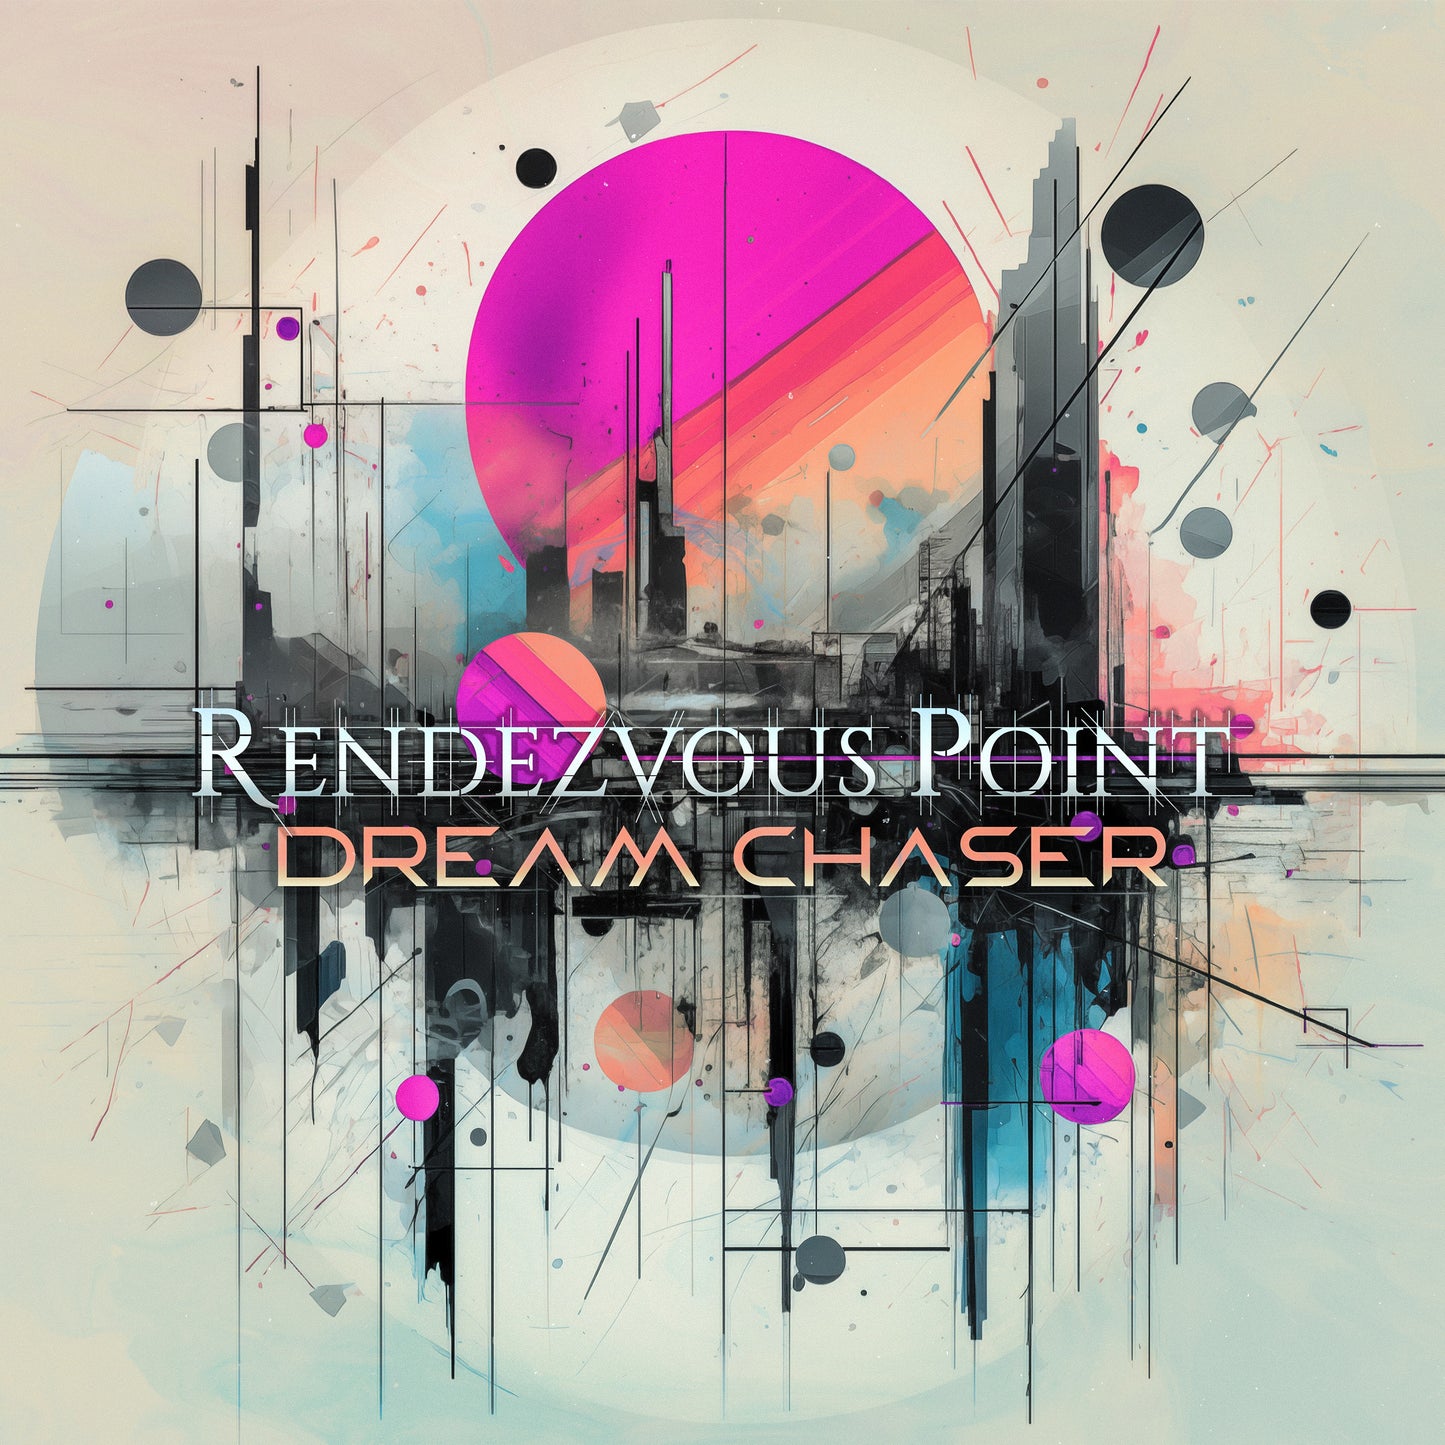 Rendezvous Point "Dream Chaser" CD-Bundle "Fireflies"